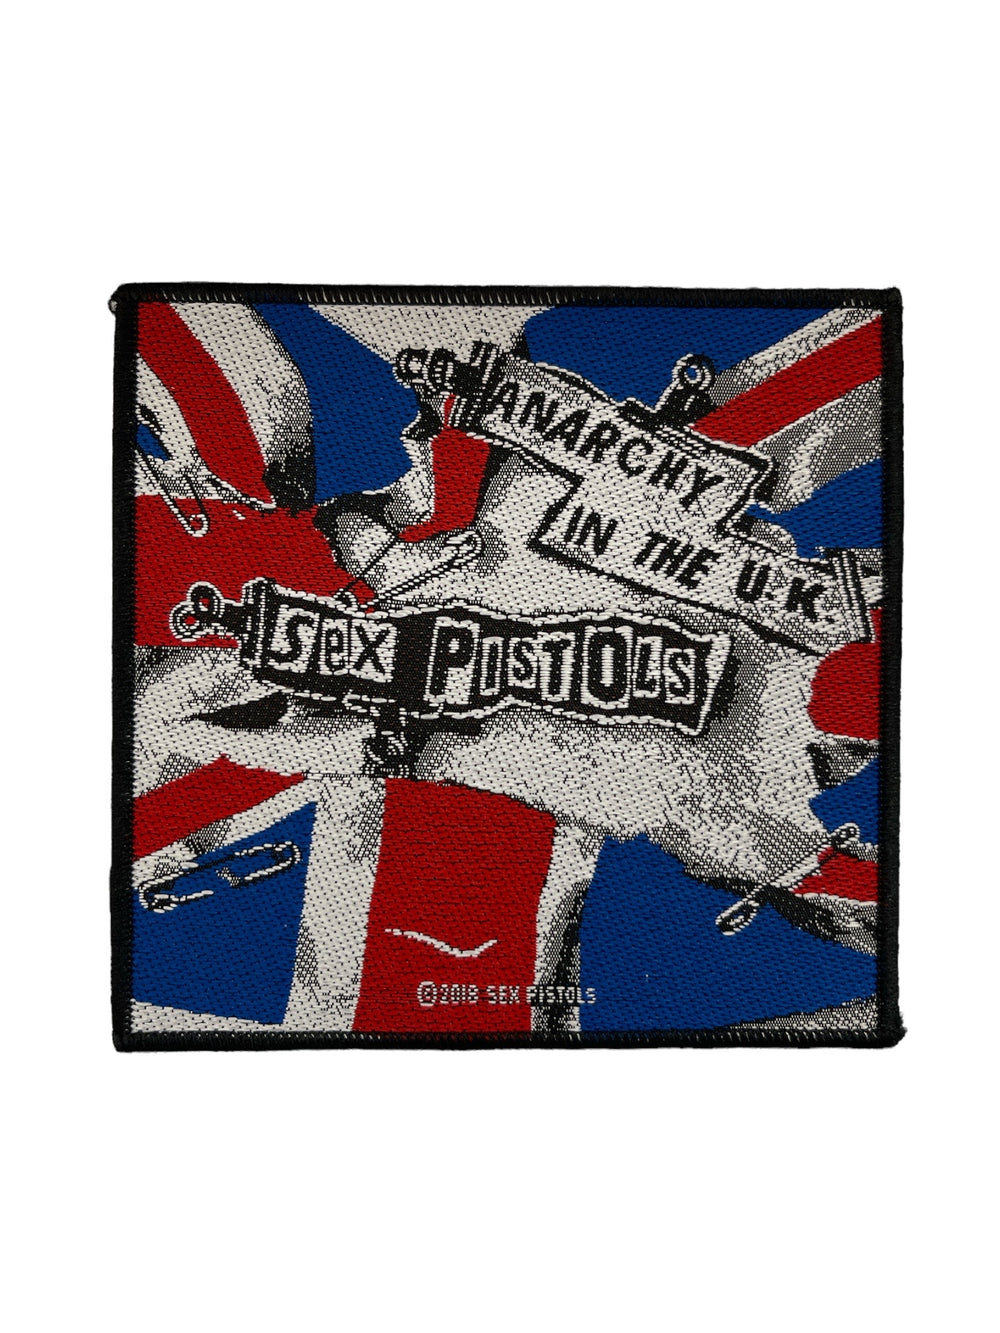 Sex Pistols Anarchy Union Official Woven Patch Brand New